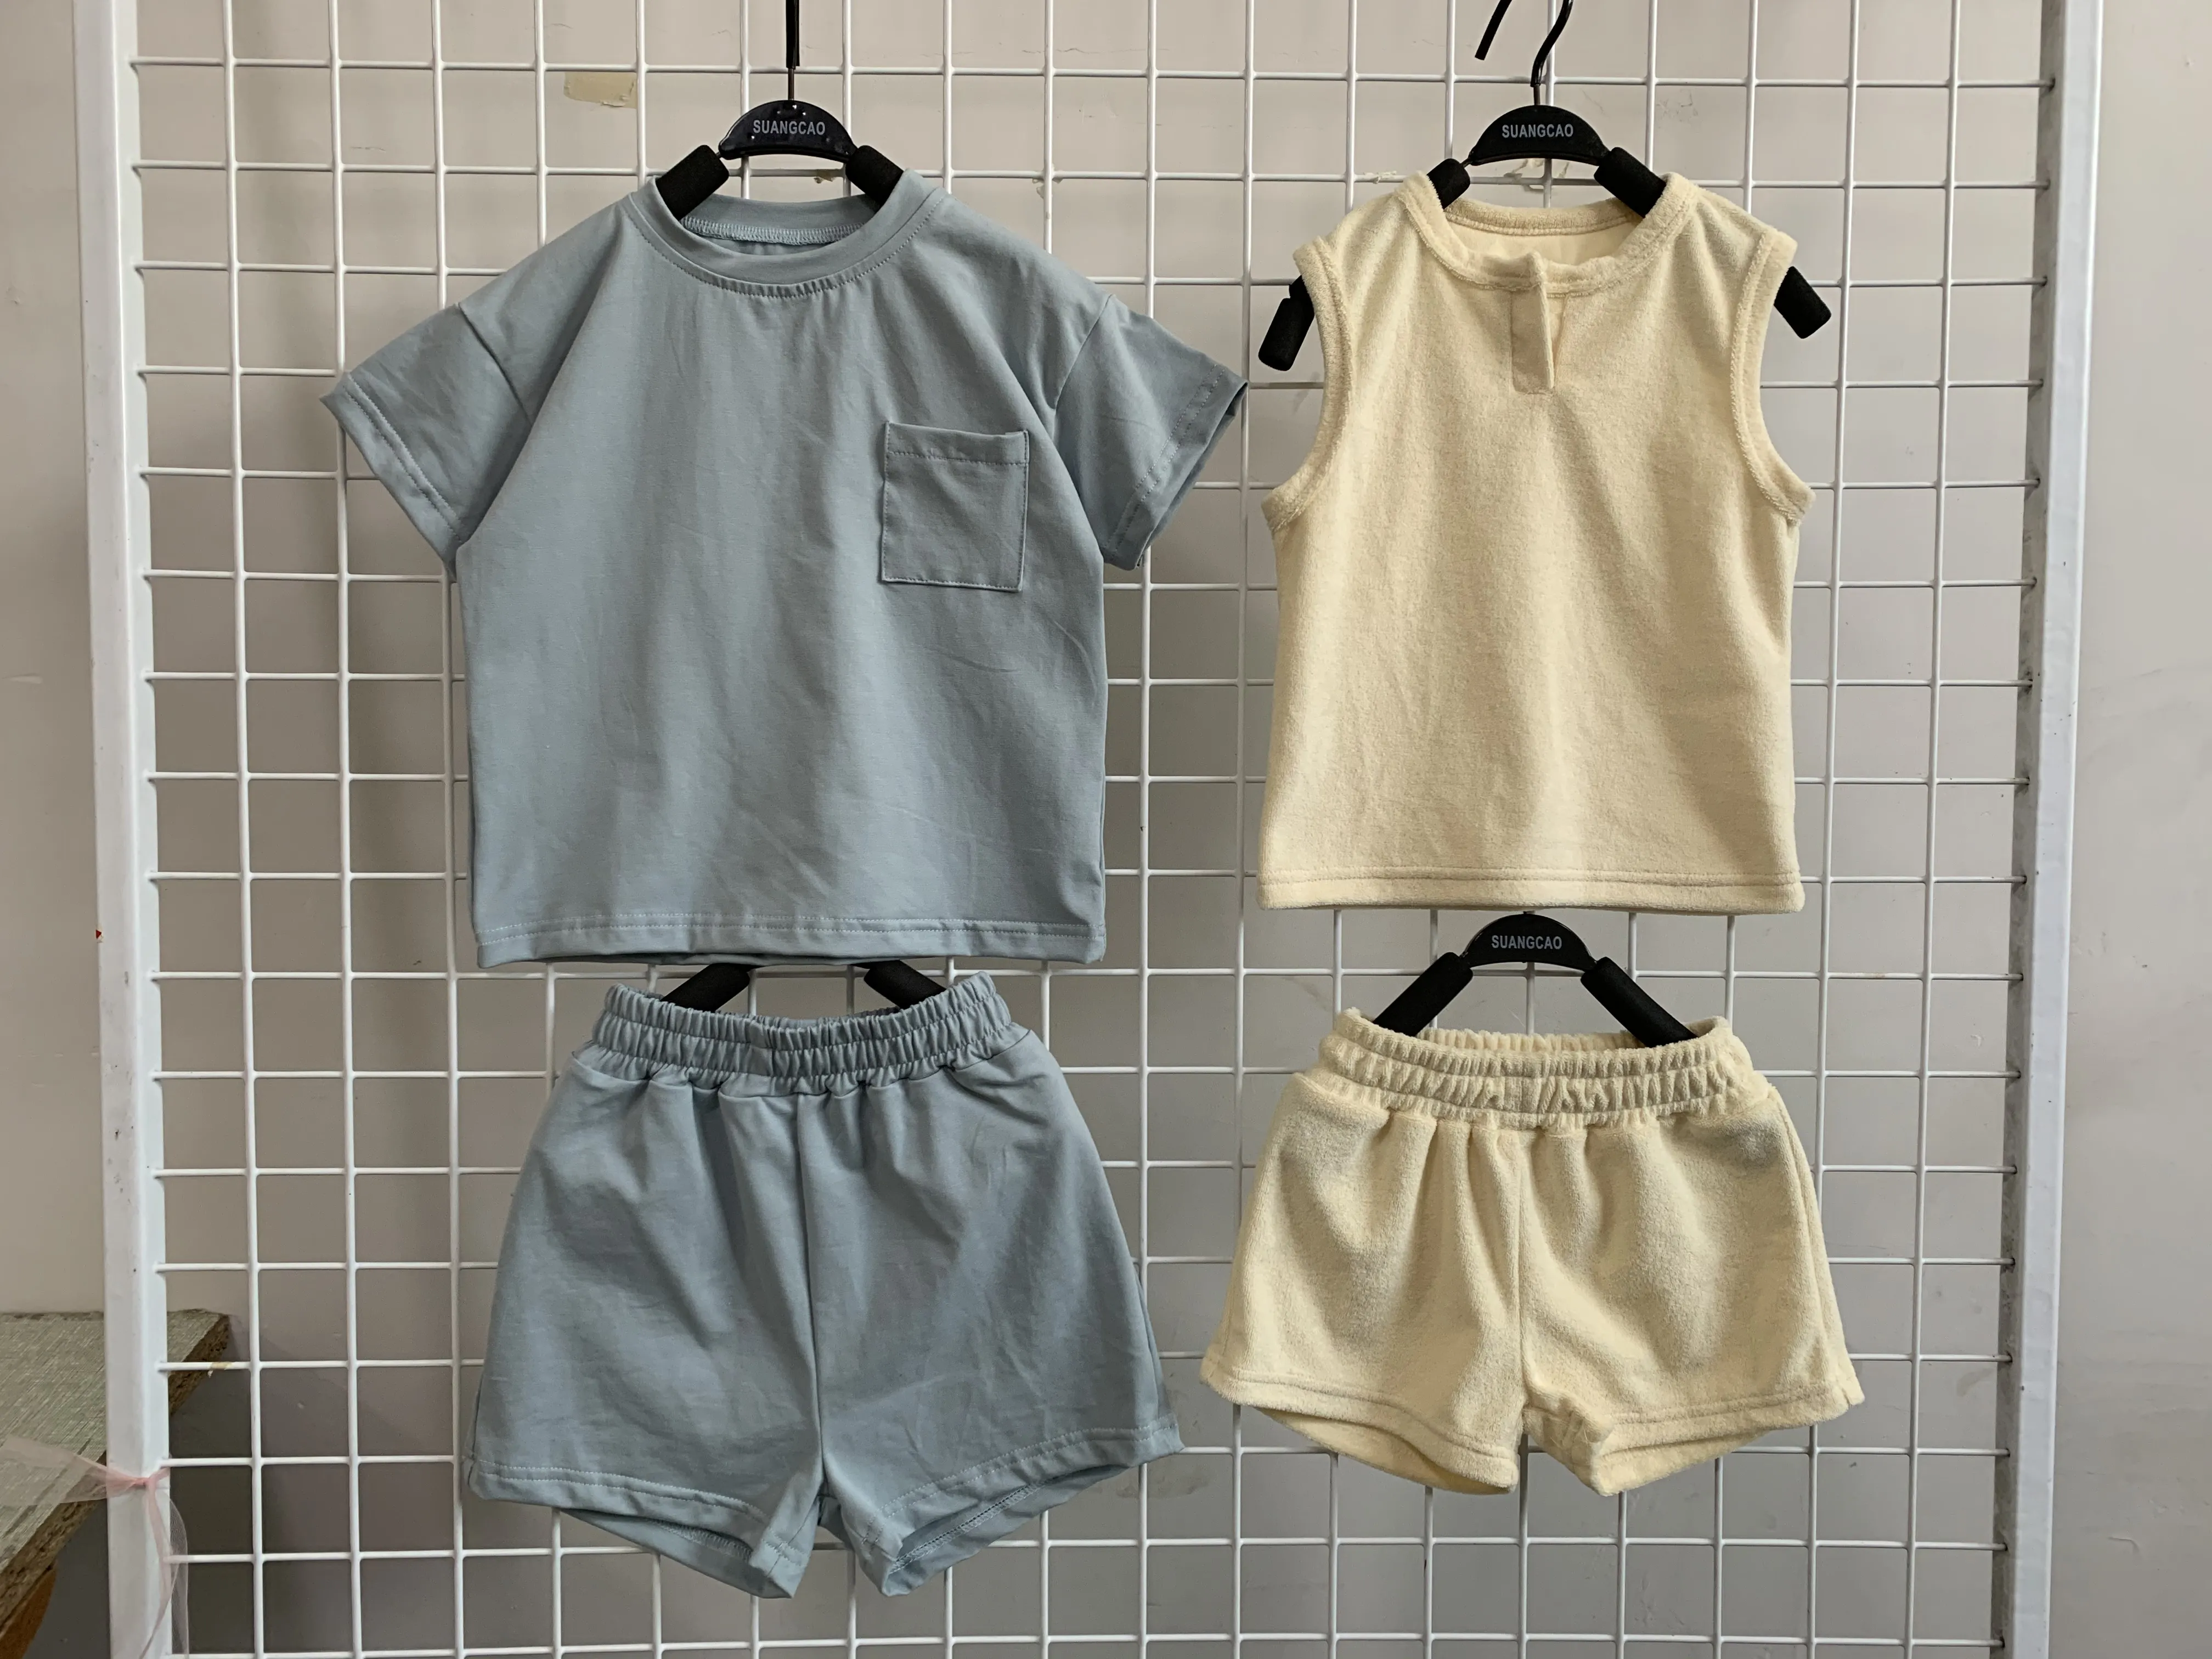 New baby toddler summer terry sleeveless top and drawstring shorts soft set casual outdoor beach wear clothing set